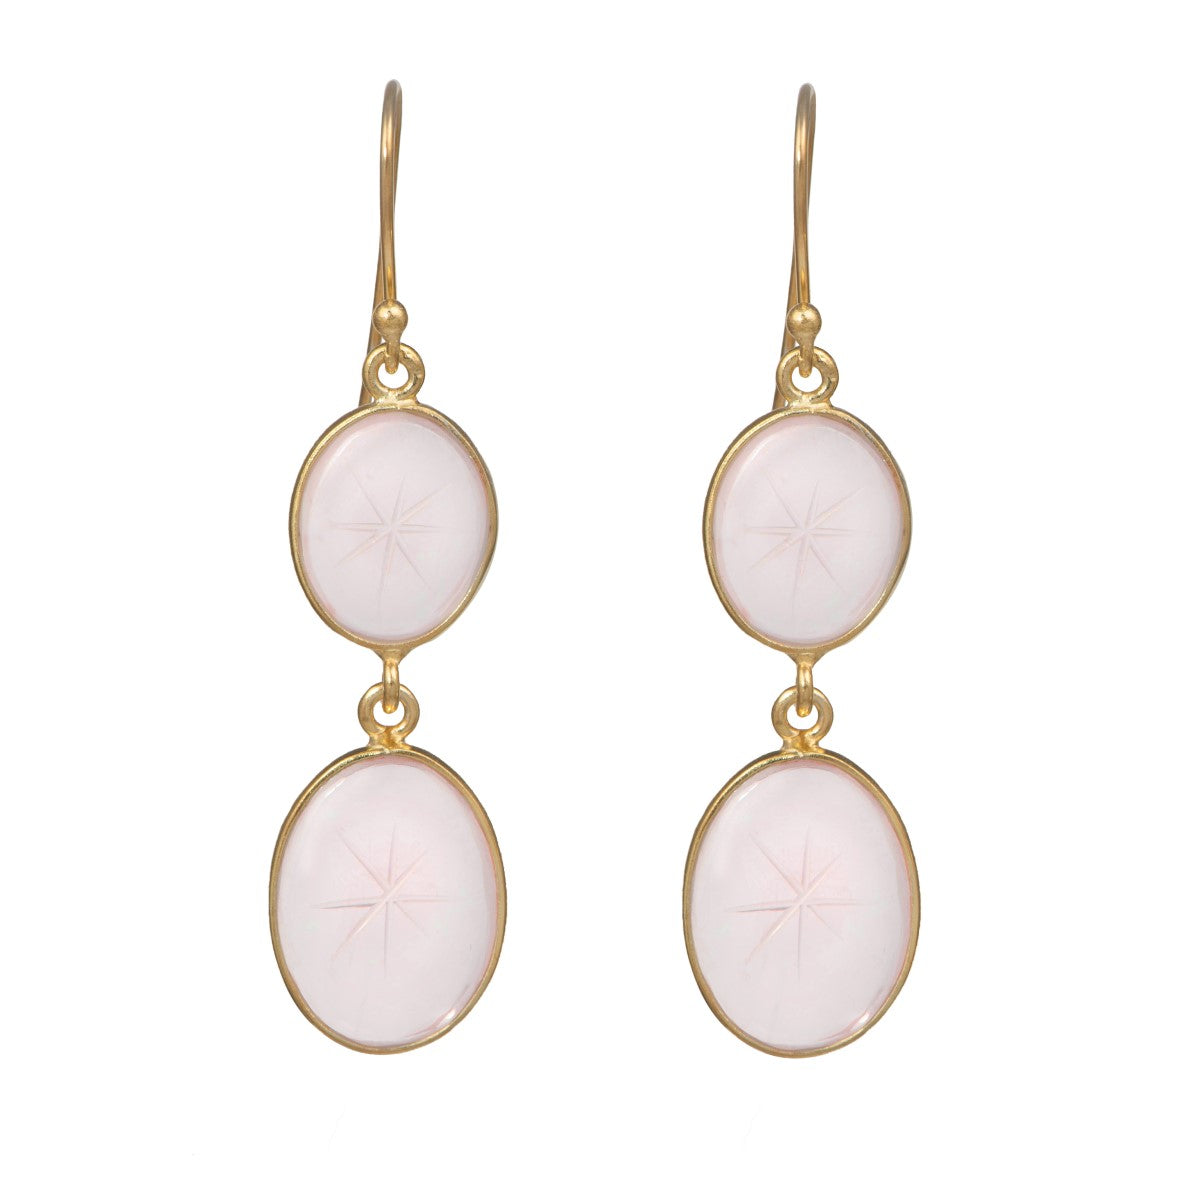 Star Patterned Oval Rose Quartz Gemstone Earrings in Gold Plated Sterling Silver